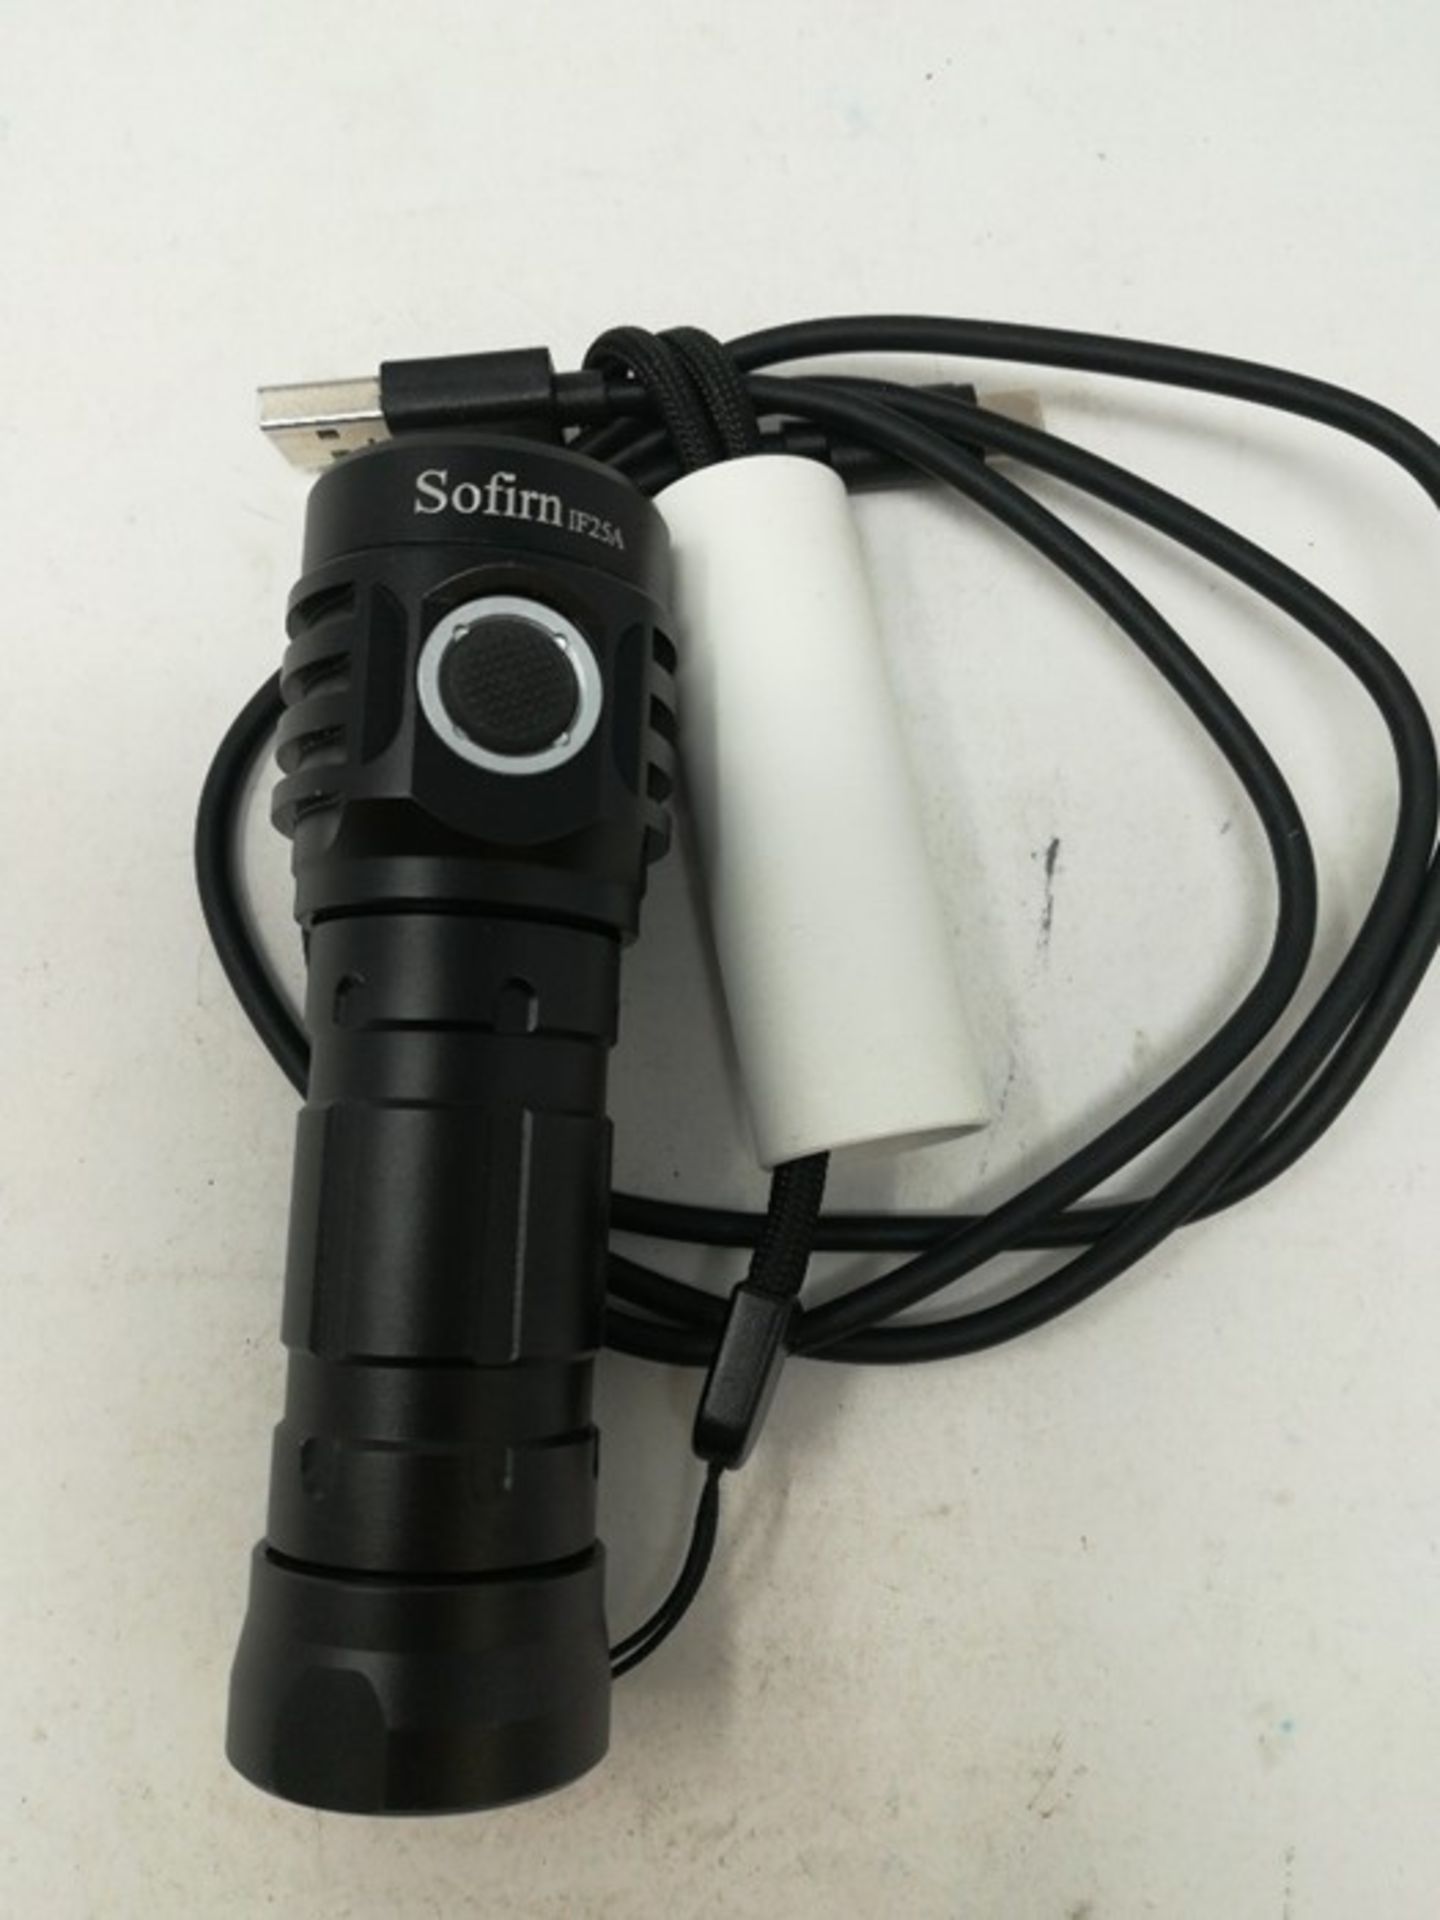 Sofirn IF25A Led Torch, Super Bright 3800 Lumen - Image 2 of 2